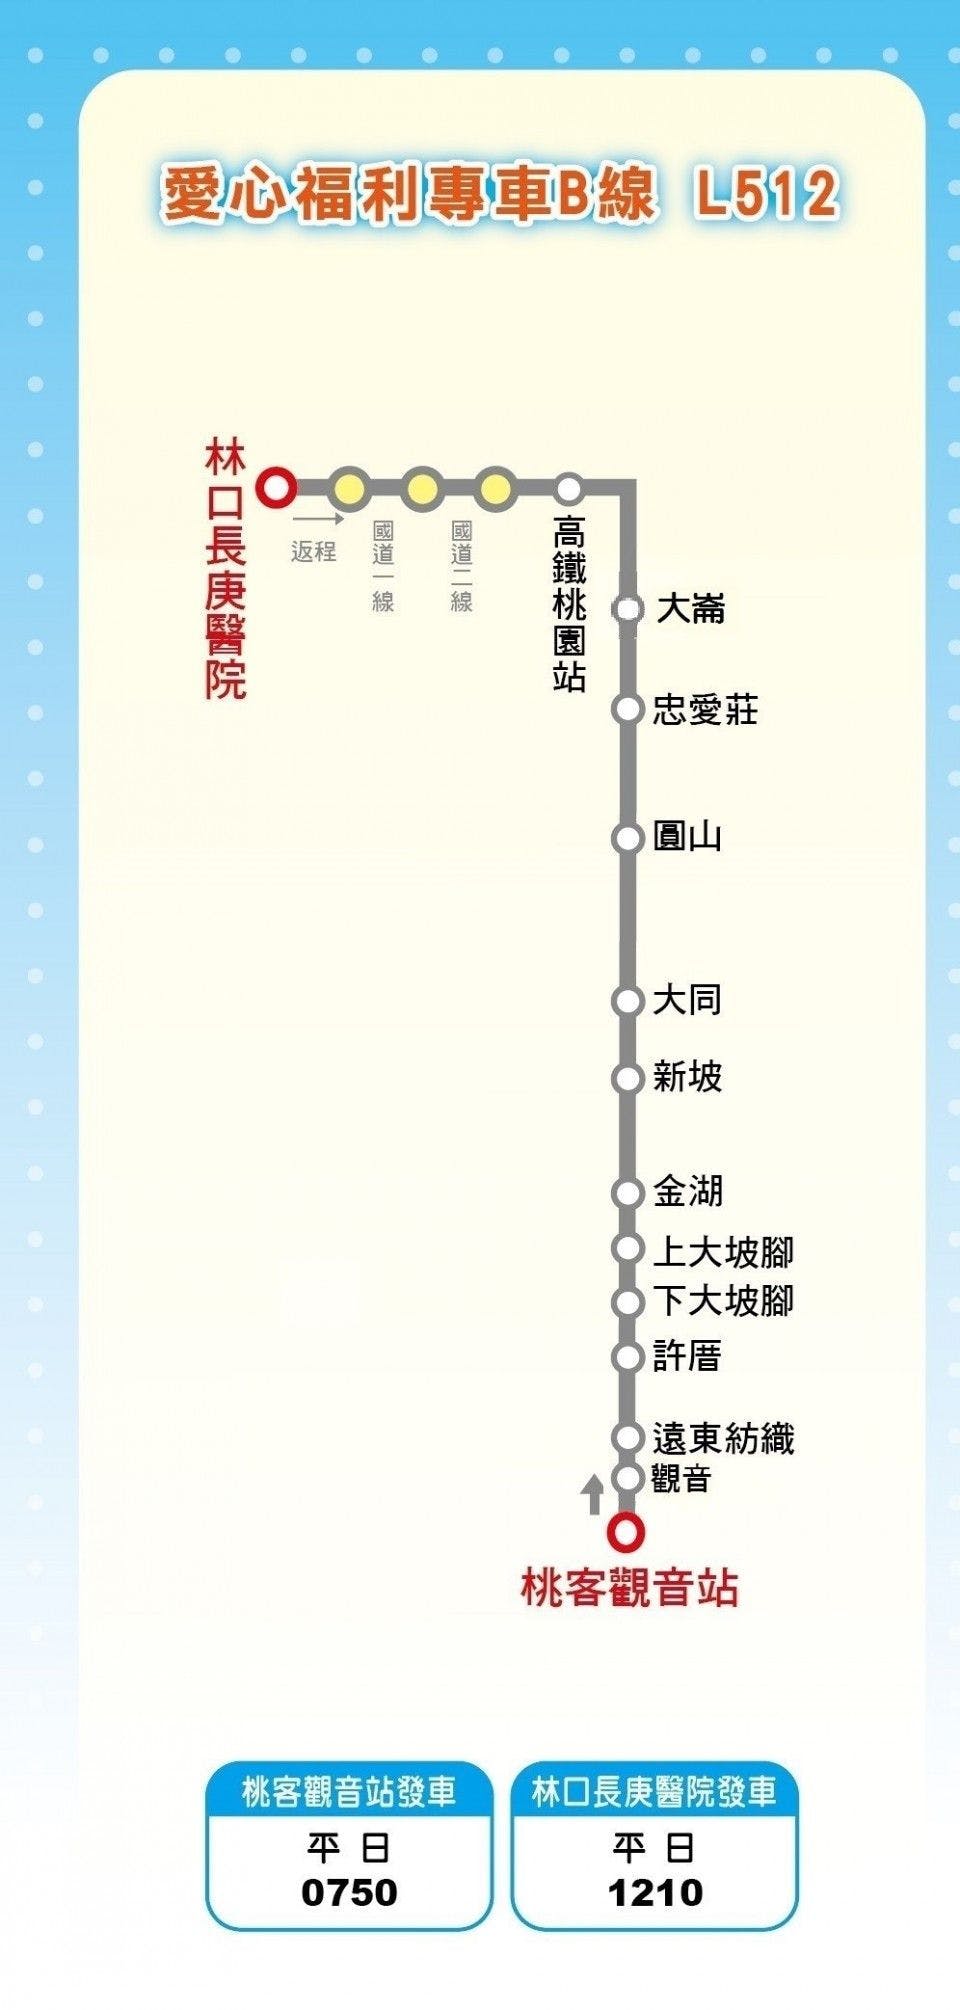 L512Route Map-桃園 Bus